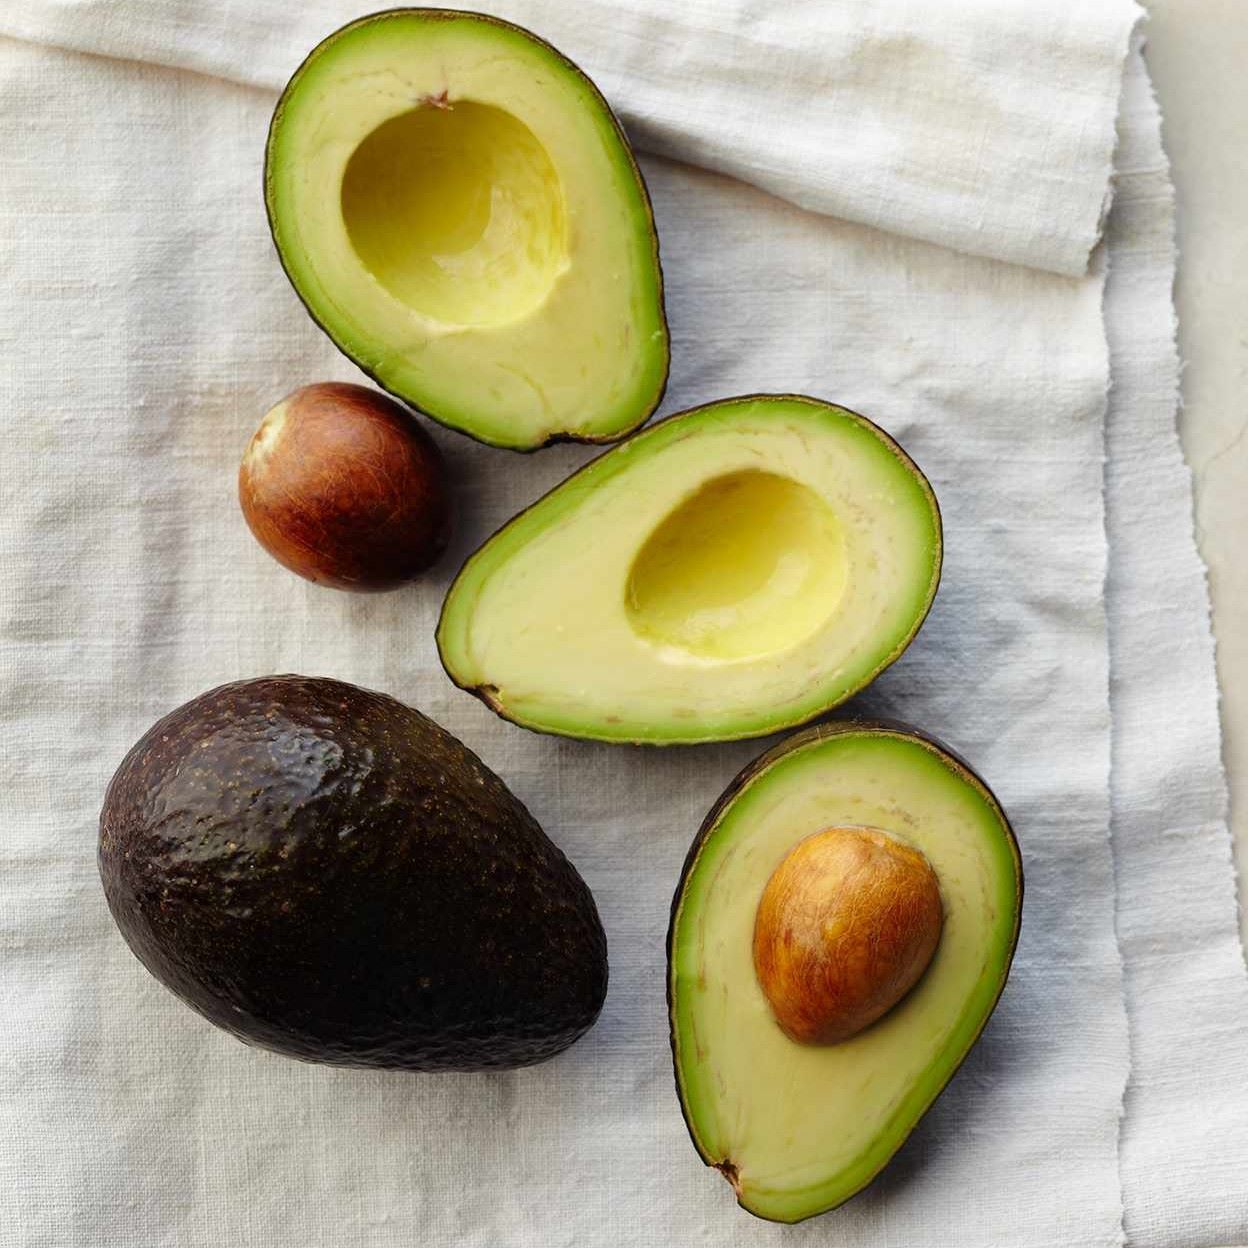 How To Store Half An Avocado Without Lemon